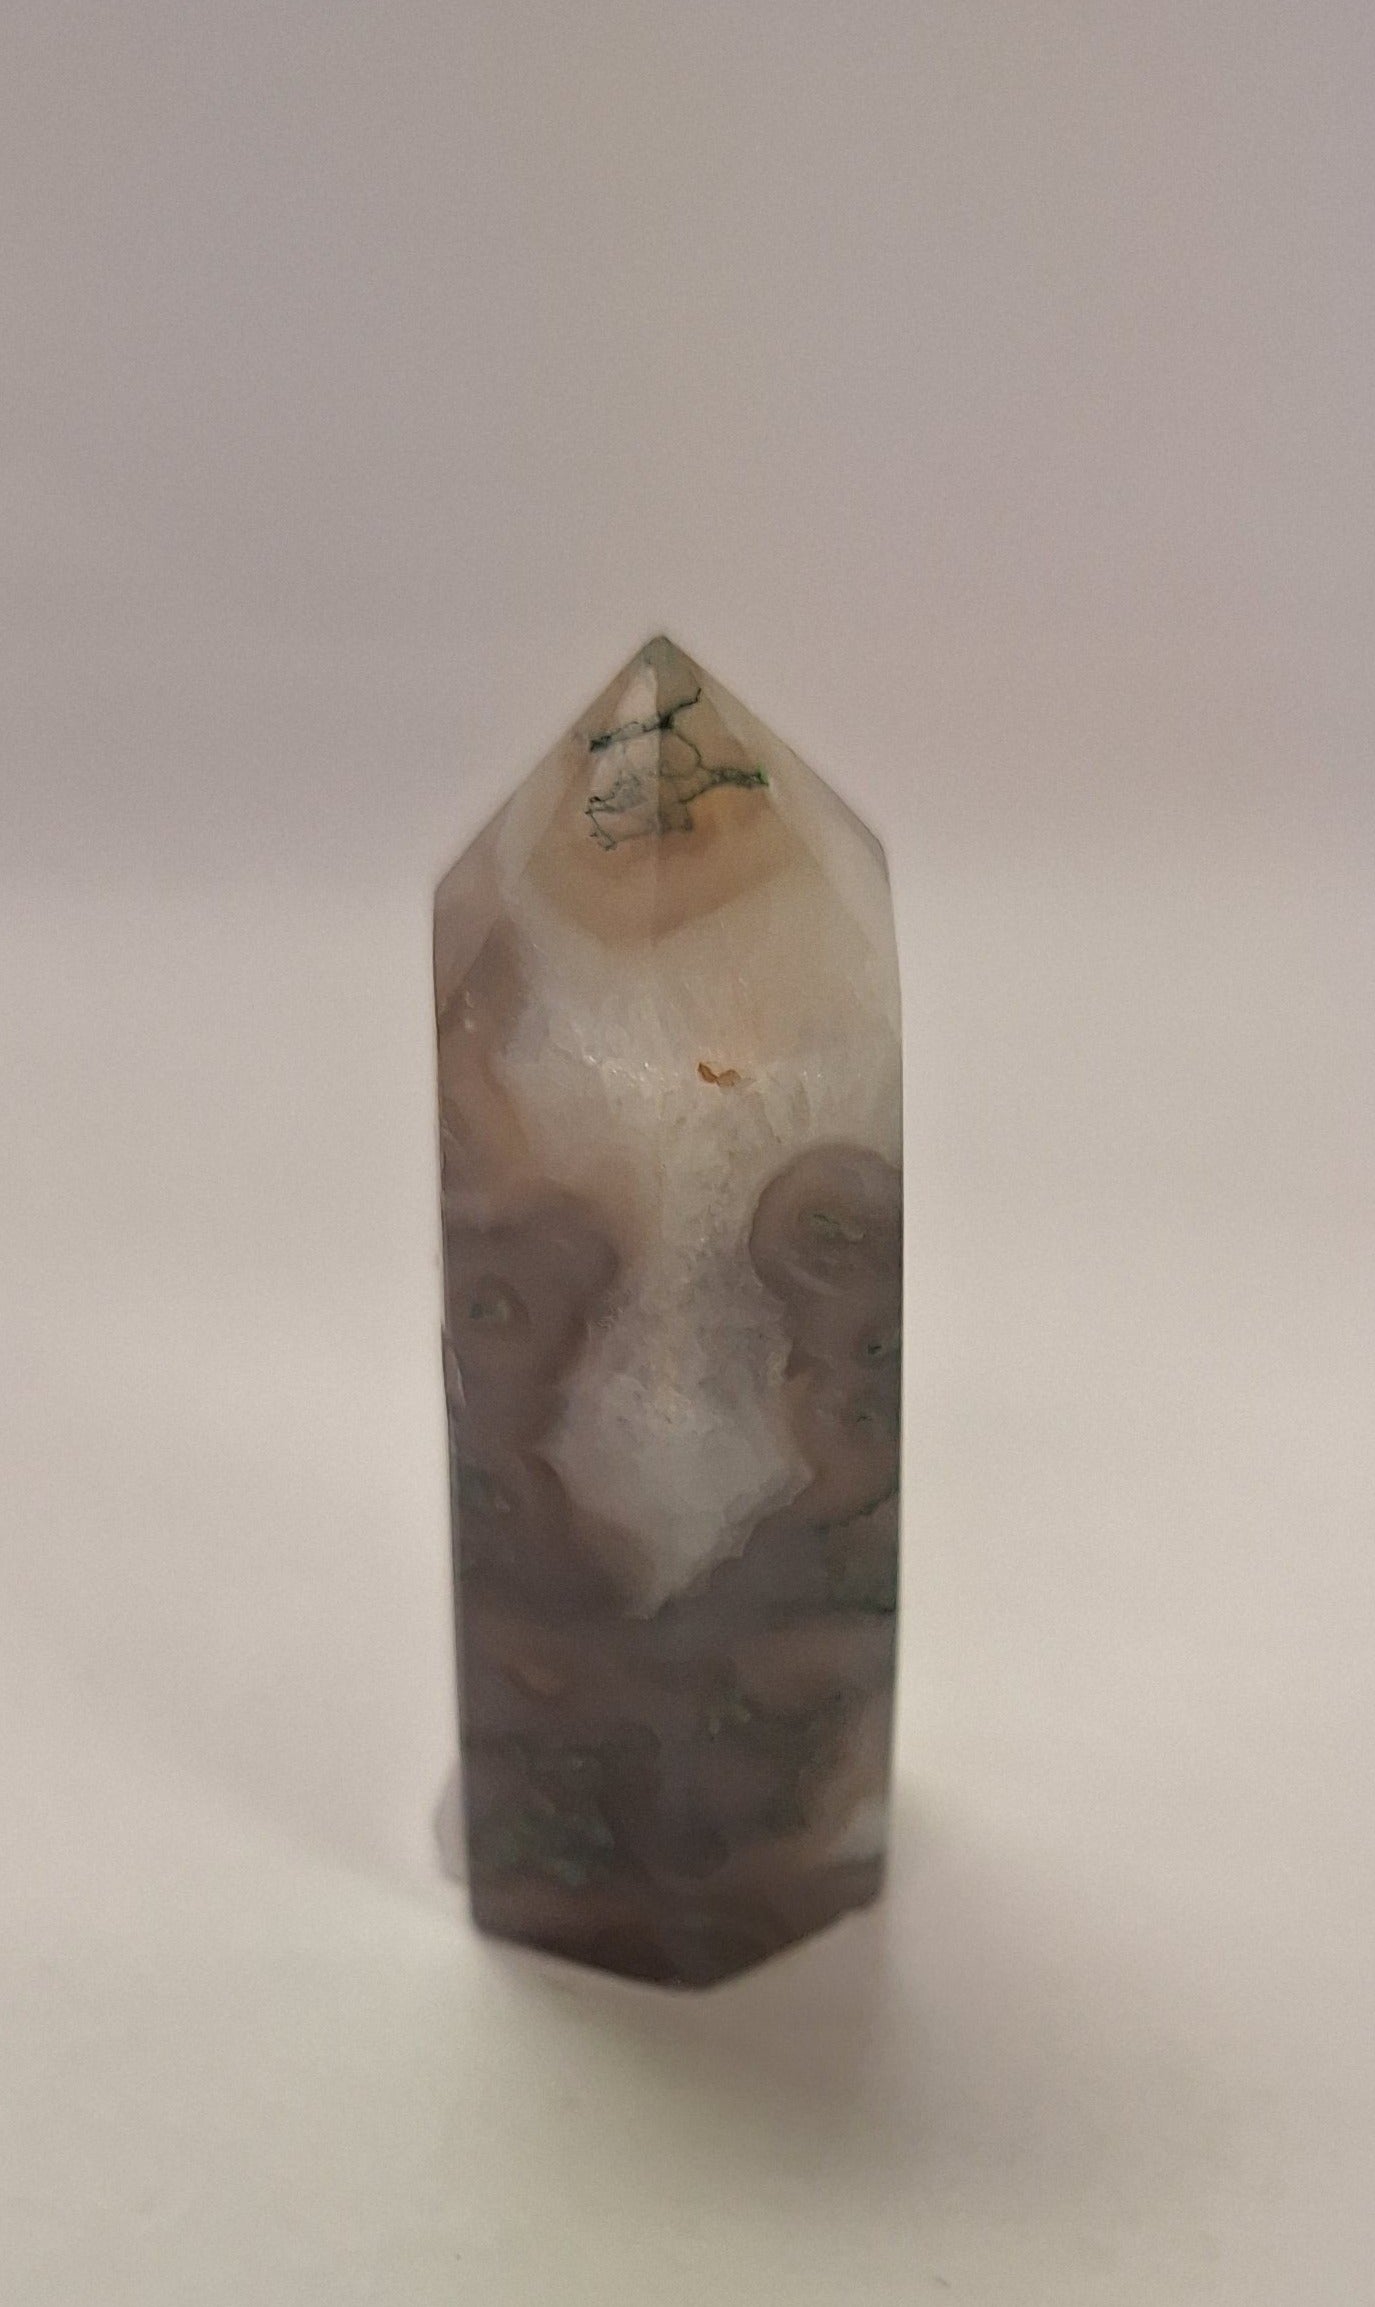 Tower, Gray agate.